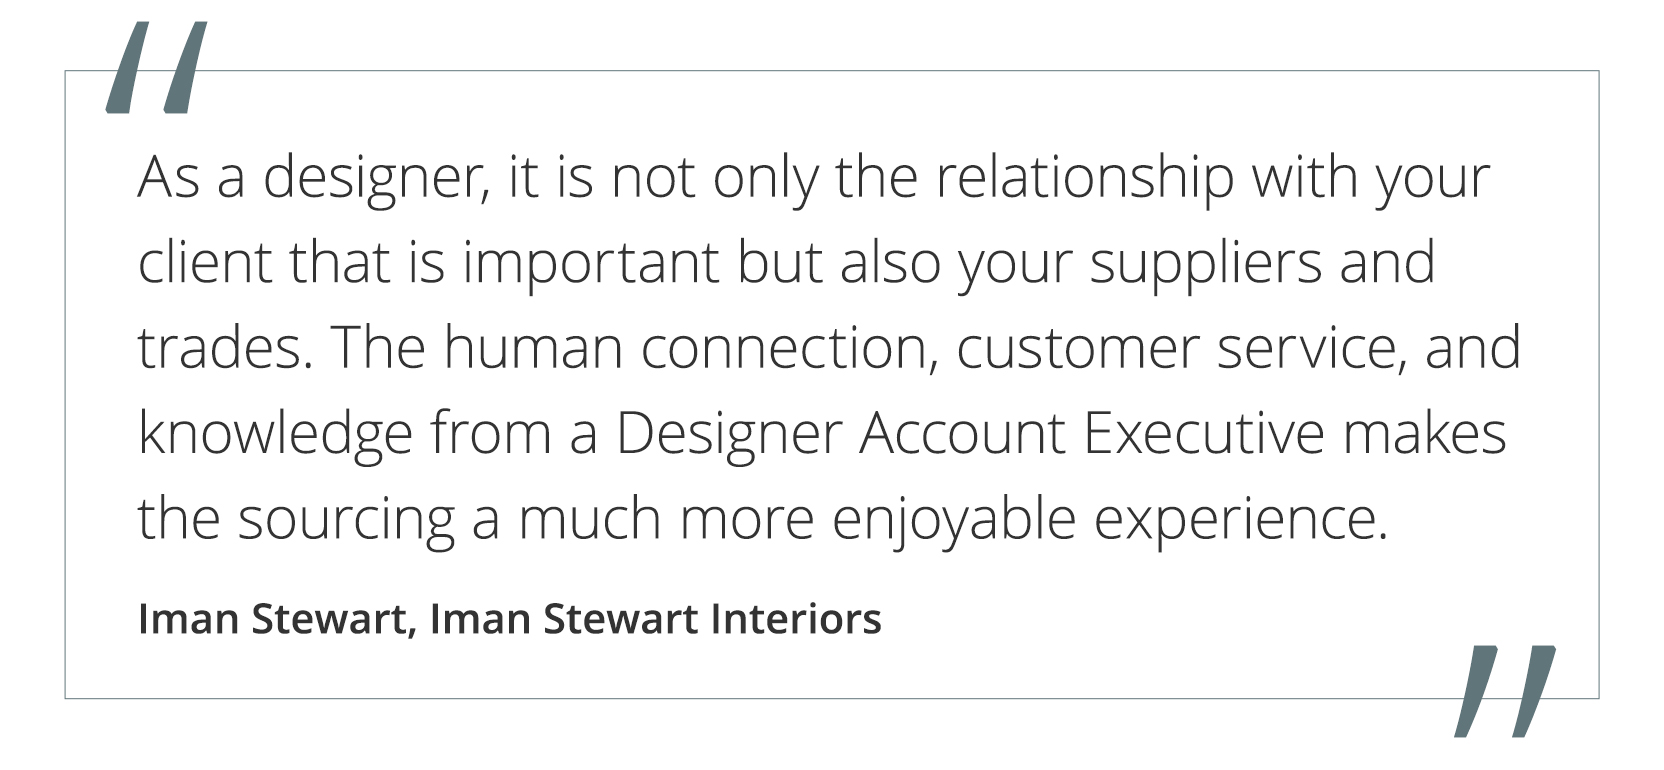 Graphic featuring the quote “As a designer, it is not only the relationship with your client that is important but also your suppliers and trades. The human connection, customer service and knowledge from a Designer Account Executive makes the sourcing a much more enjoyable experience.” by Iman Stewart of Iman Stewart Interiors.